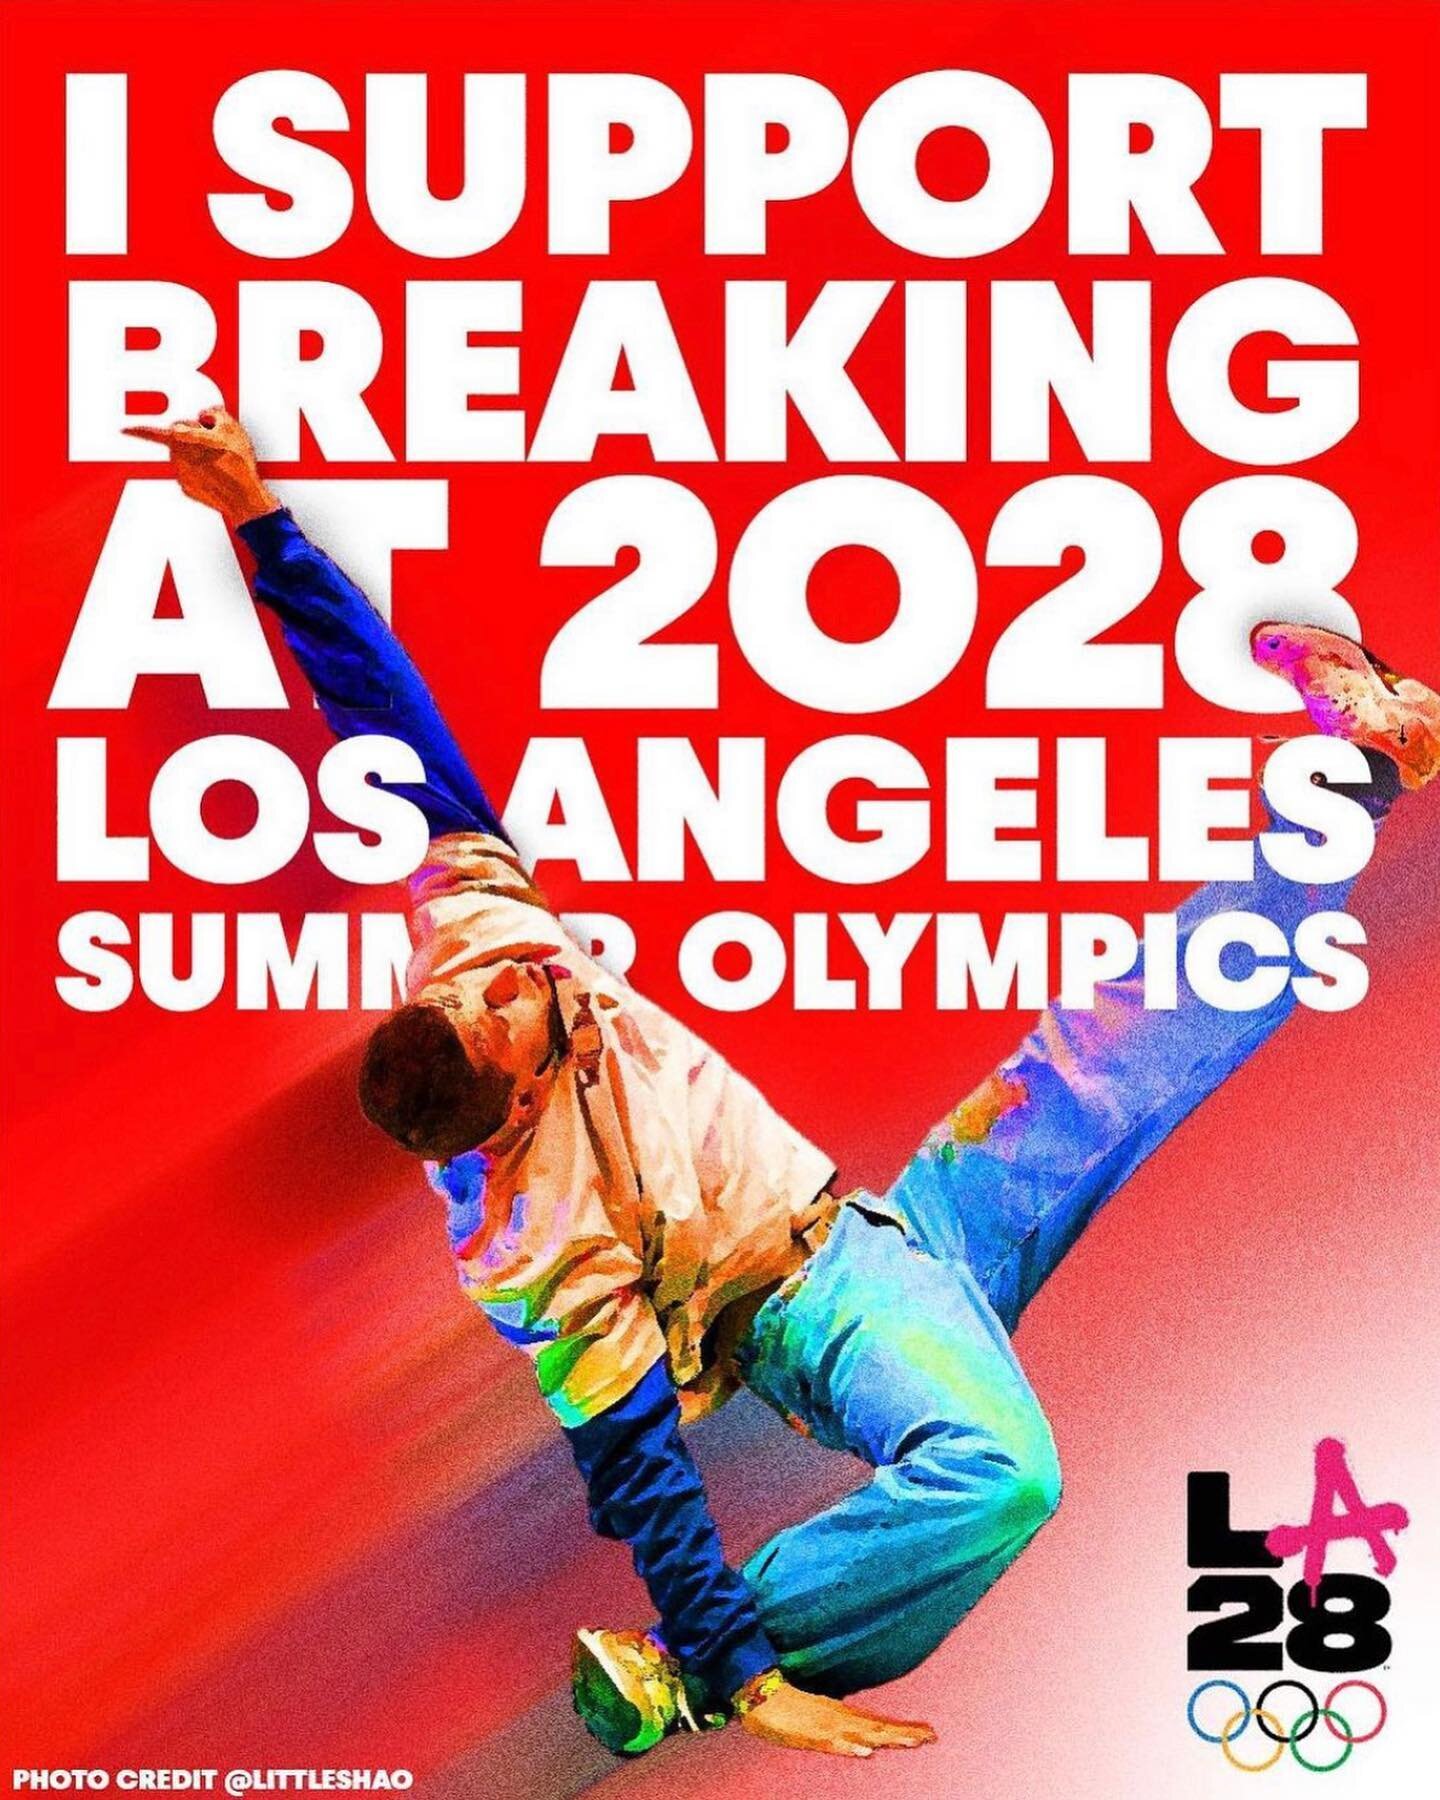 Advocating support for breaking at the LA 2028 Olympics. Let&rsquo;s do this! @la28games #LA28 @littleshao